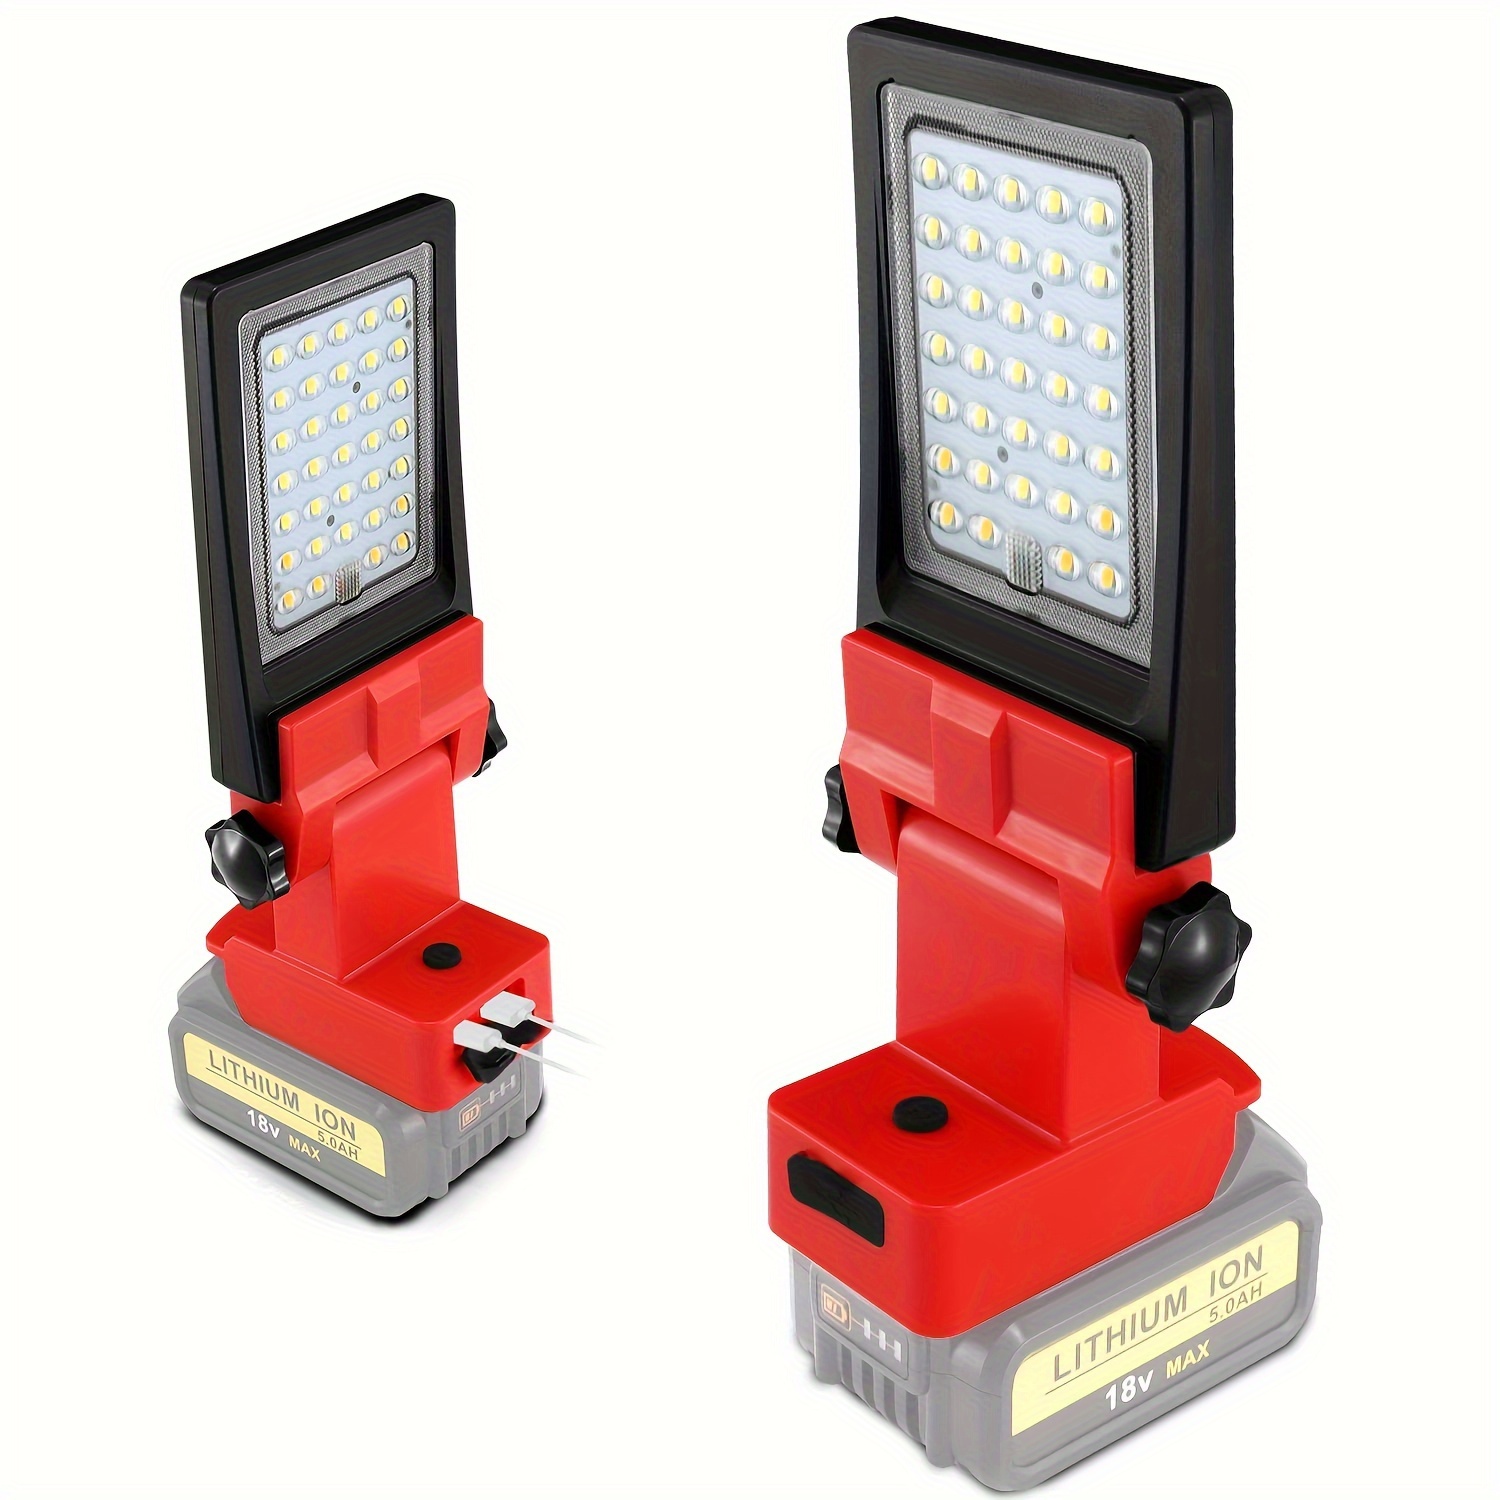 

Cordless 20v Max Led Work Light For 20v & M18 18v Battery, 35w 3600lm Flashlight, Battery Light With Usb And Type C Charging Port For Outdoors And Job Site Lighting